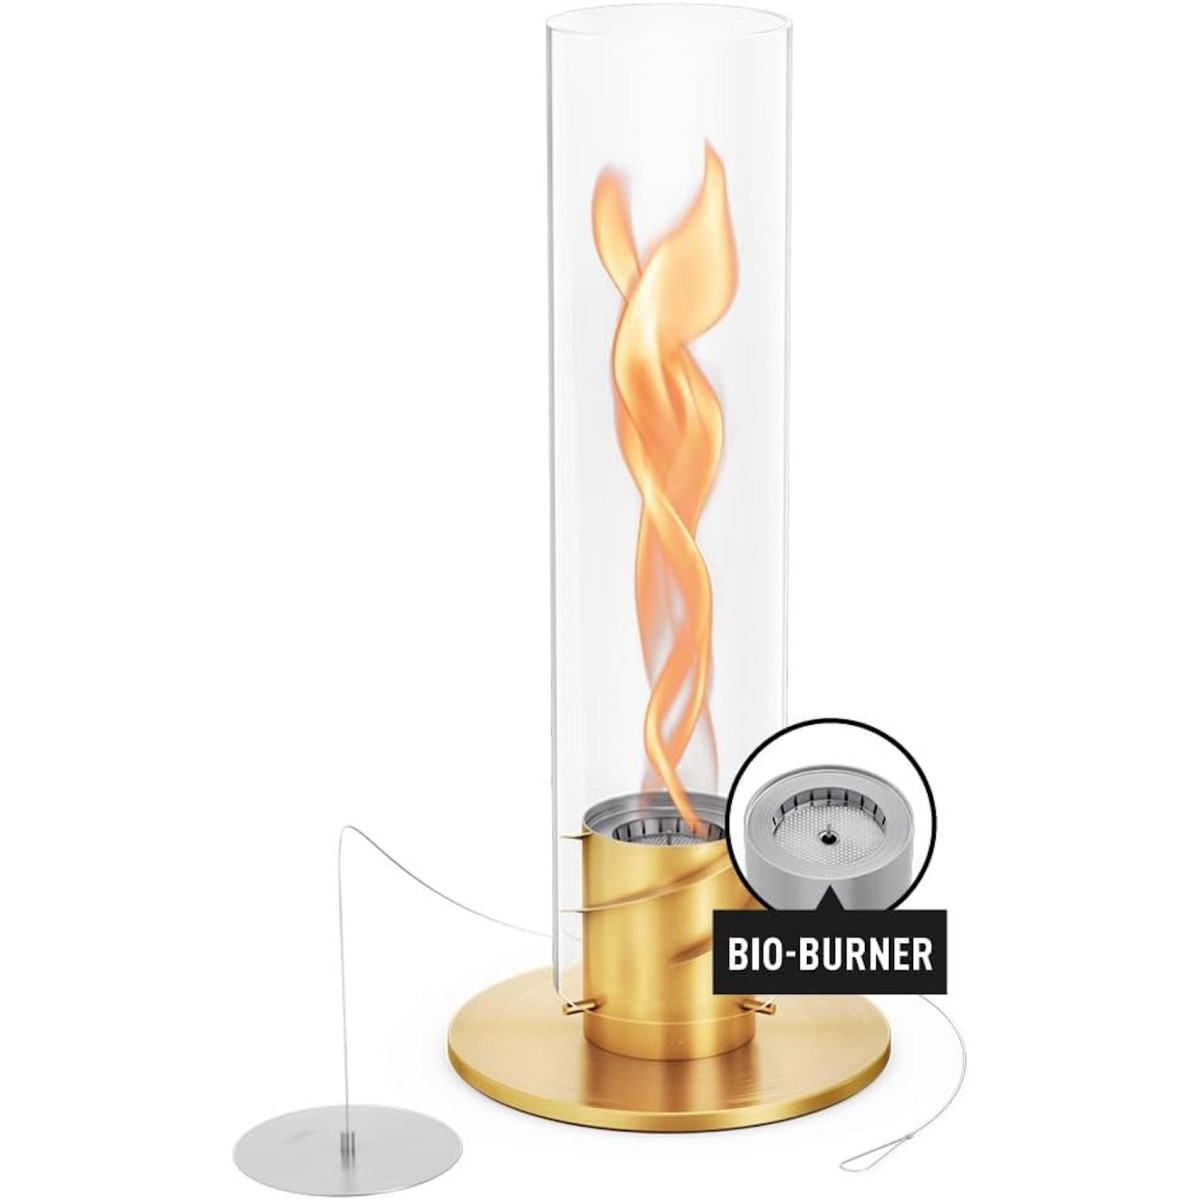 HOFATS SPIN 900 tabletop fireplace with bio-burner- gold